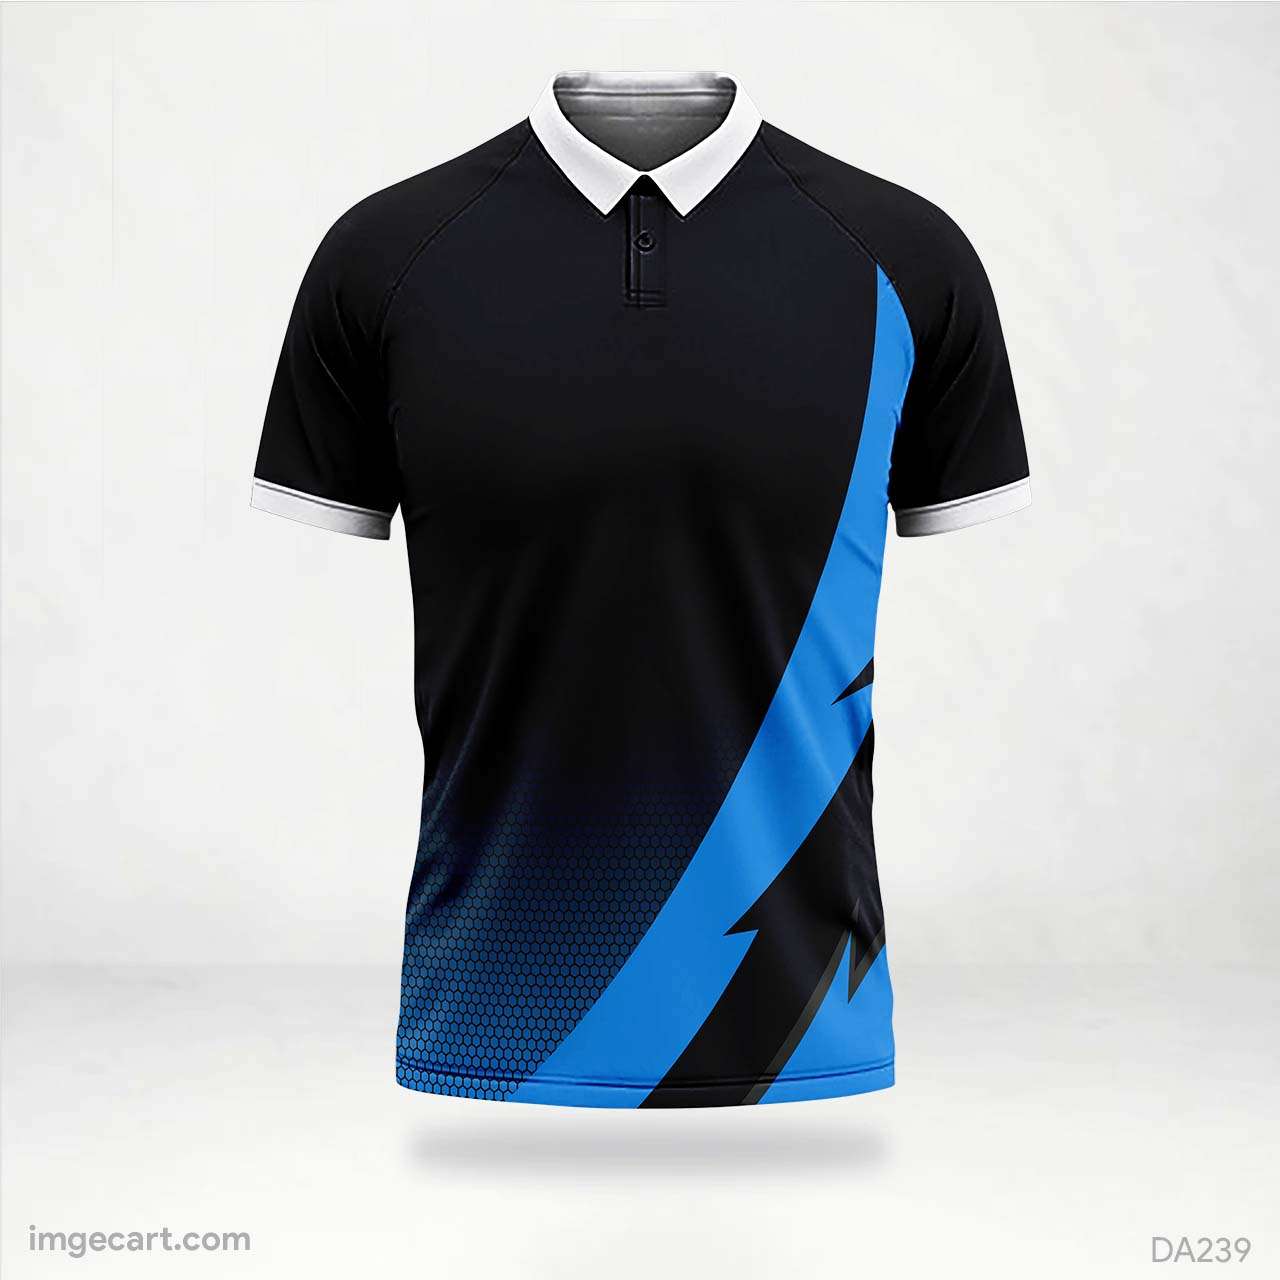 Volleyball Jersey Design black and blue pattern - imgecart